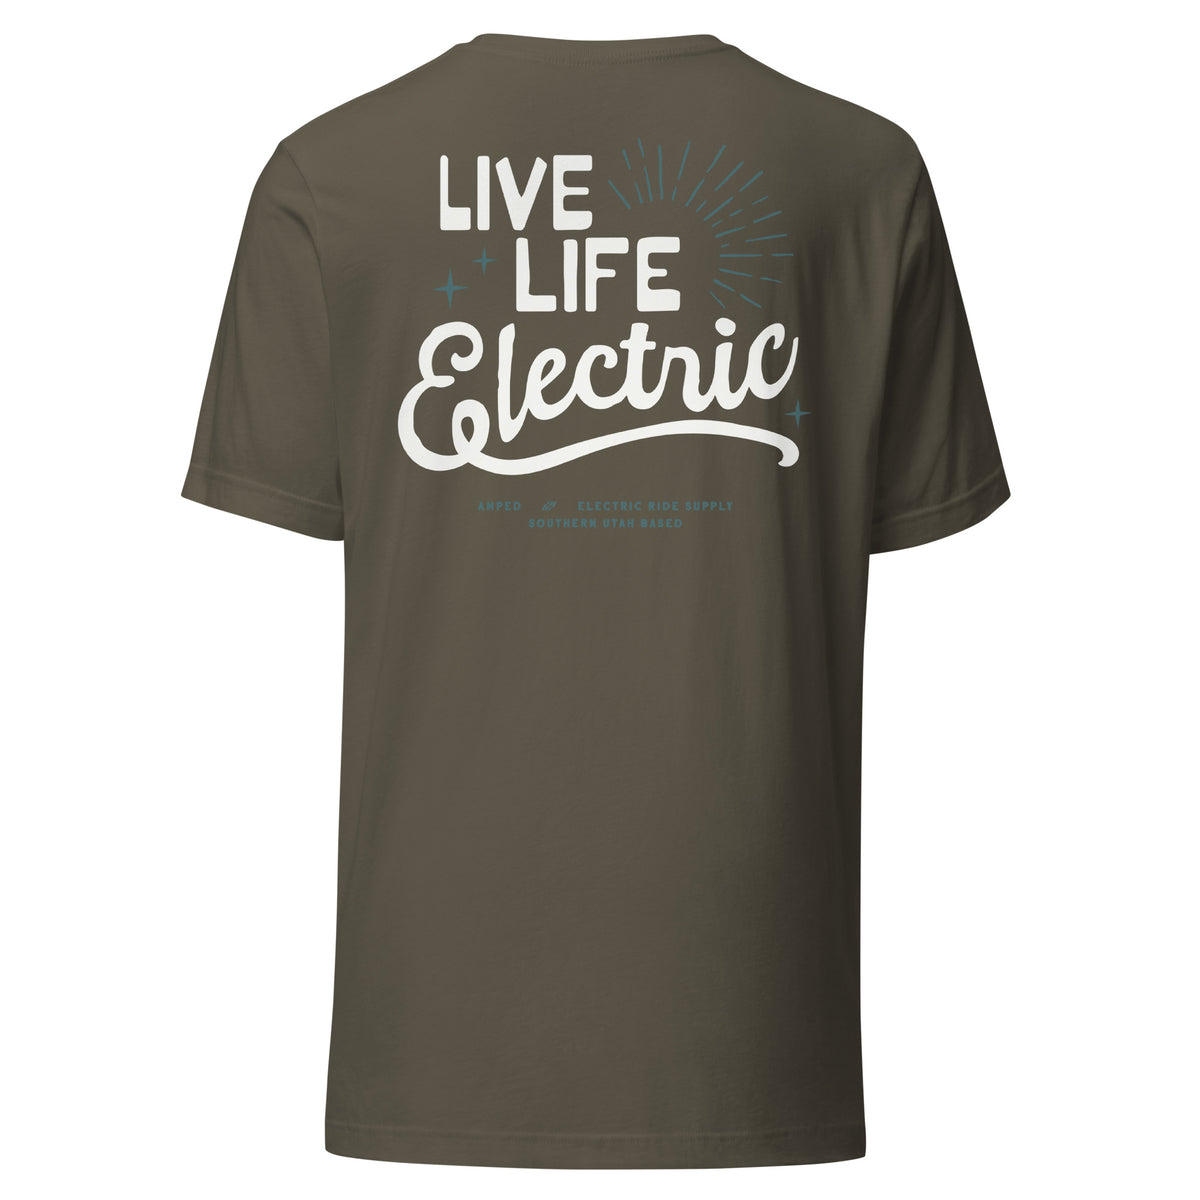 The Live Life Electric Tee 2